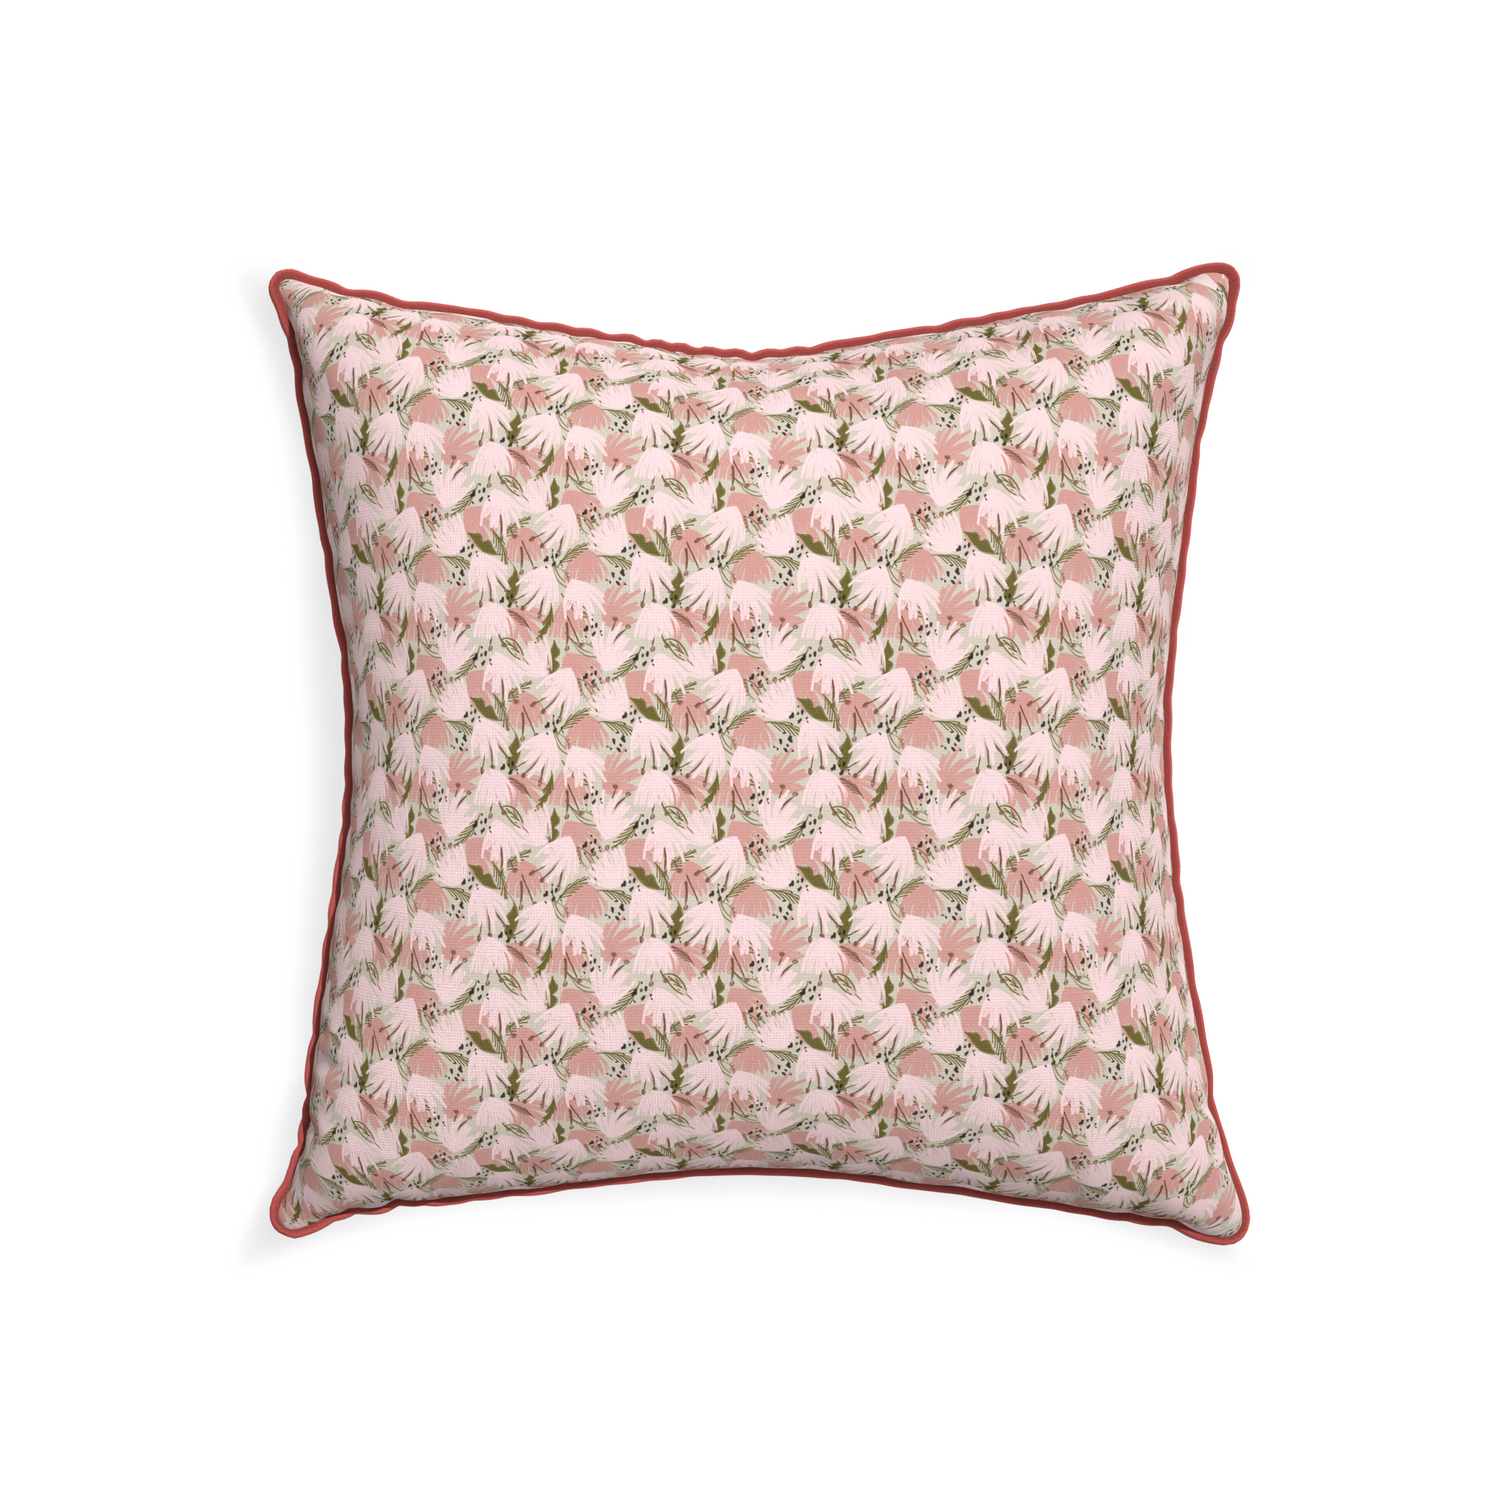 22-square eden pink custom pink floralpillow with c piping on white background